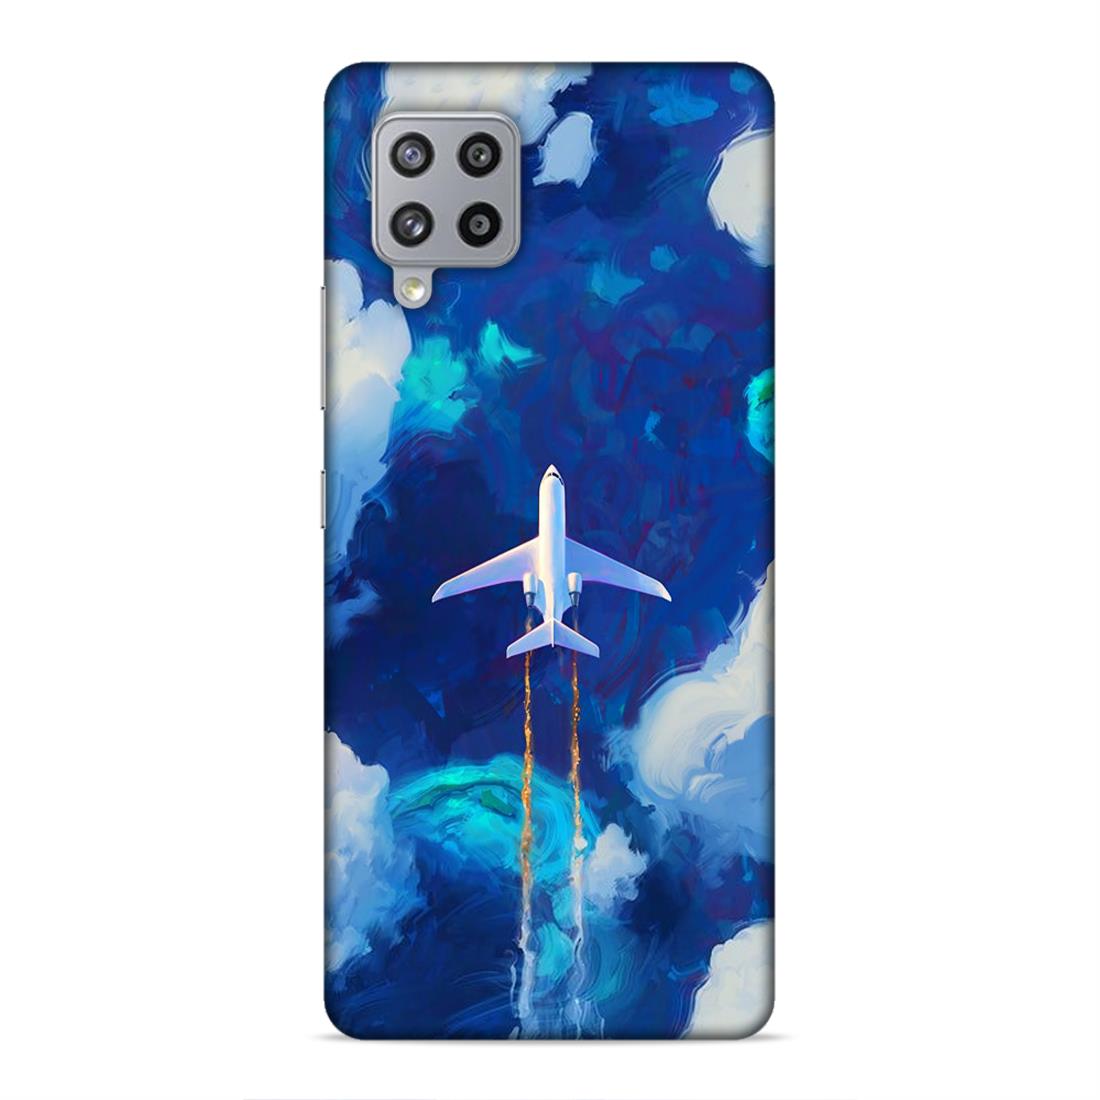 Aeroplane In The Sky Hard Back Case For Samsung Galaxy M42 5G